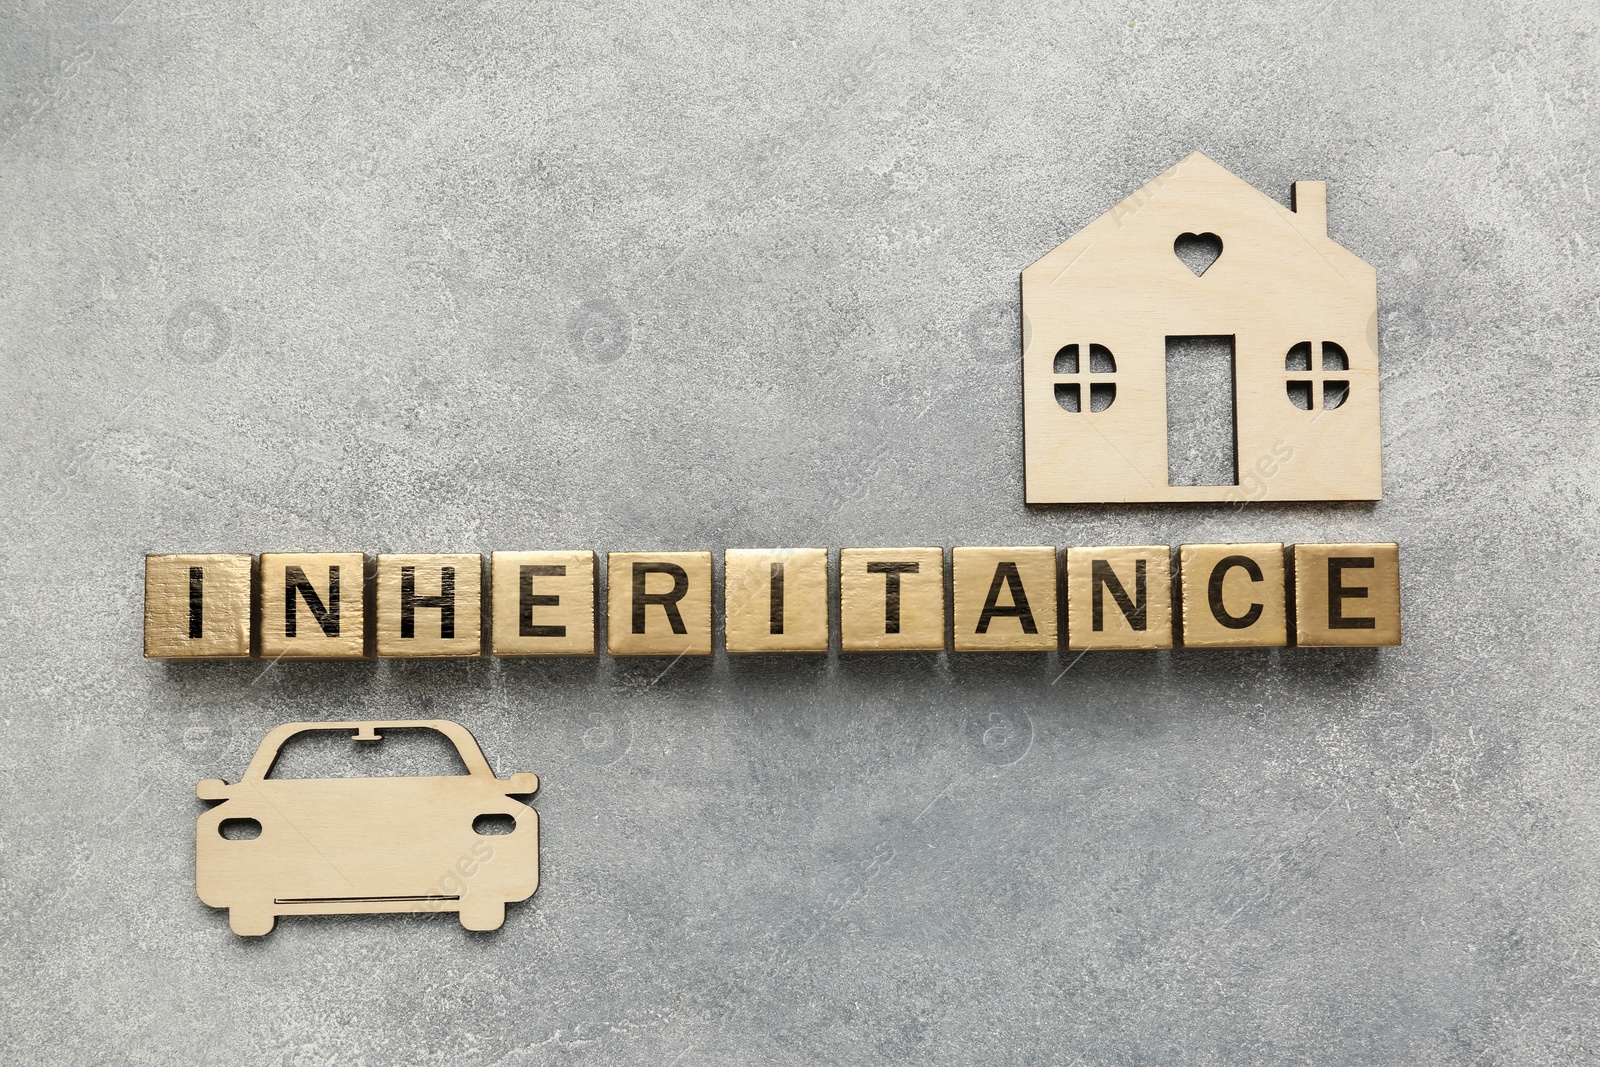 Photo of Word Inheritance made with wooden cubes, house and car models on grey background, flat lay